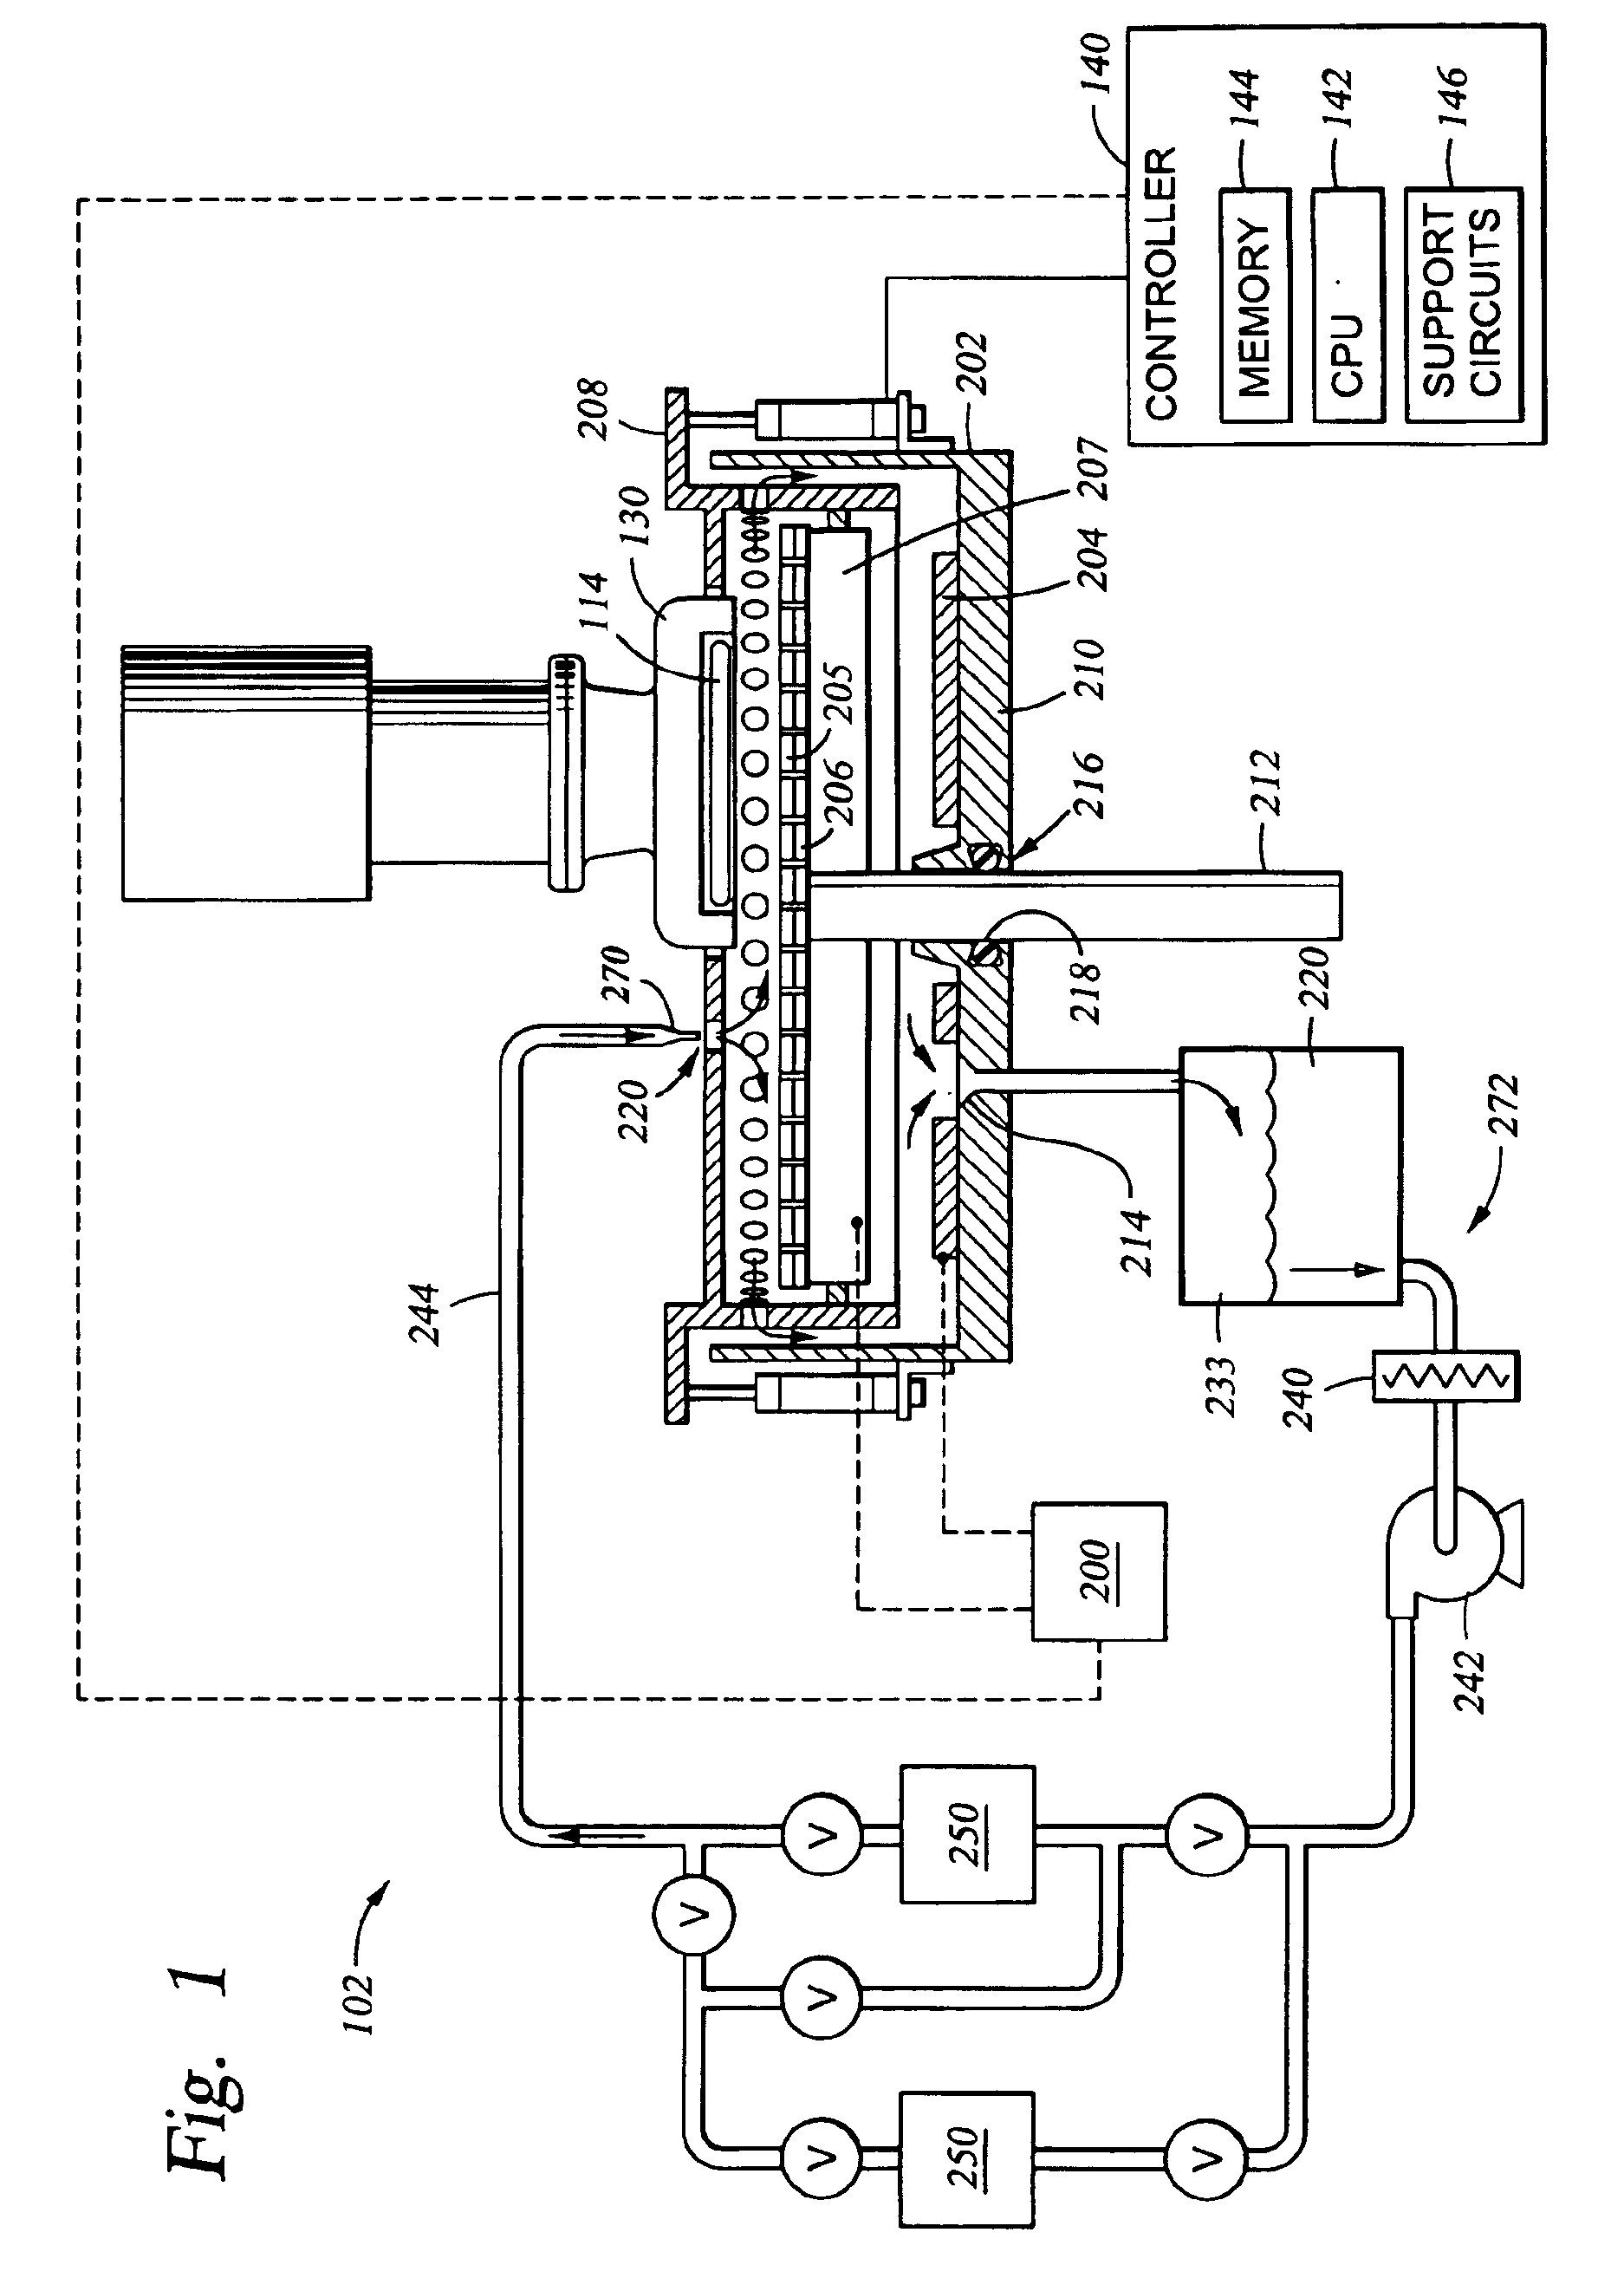 Electrolyte composition and treatment for electrolytic chemical mechanical polishing